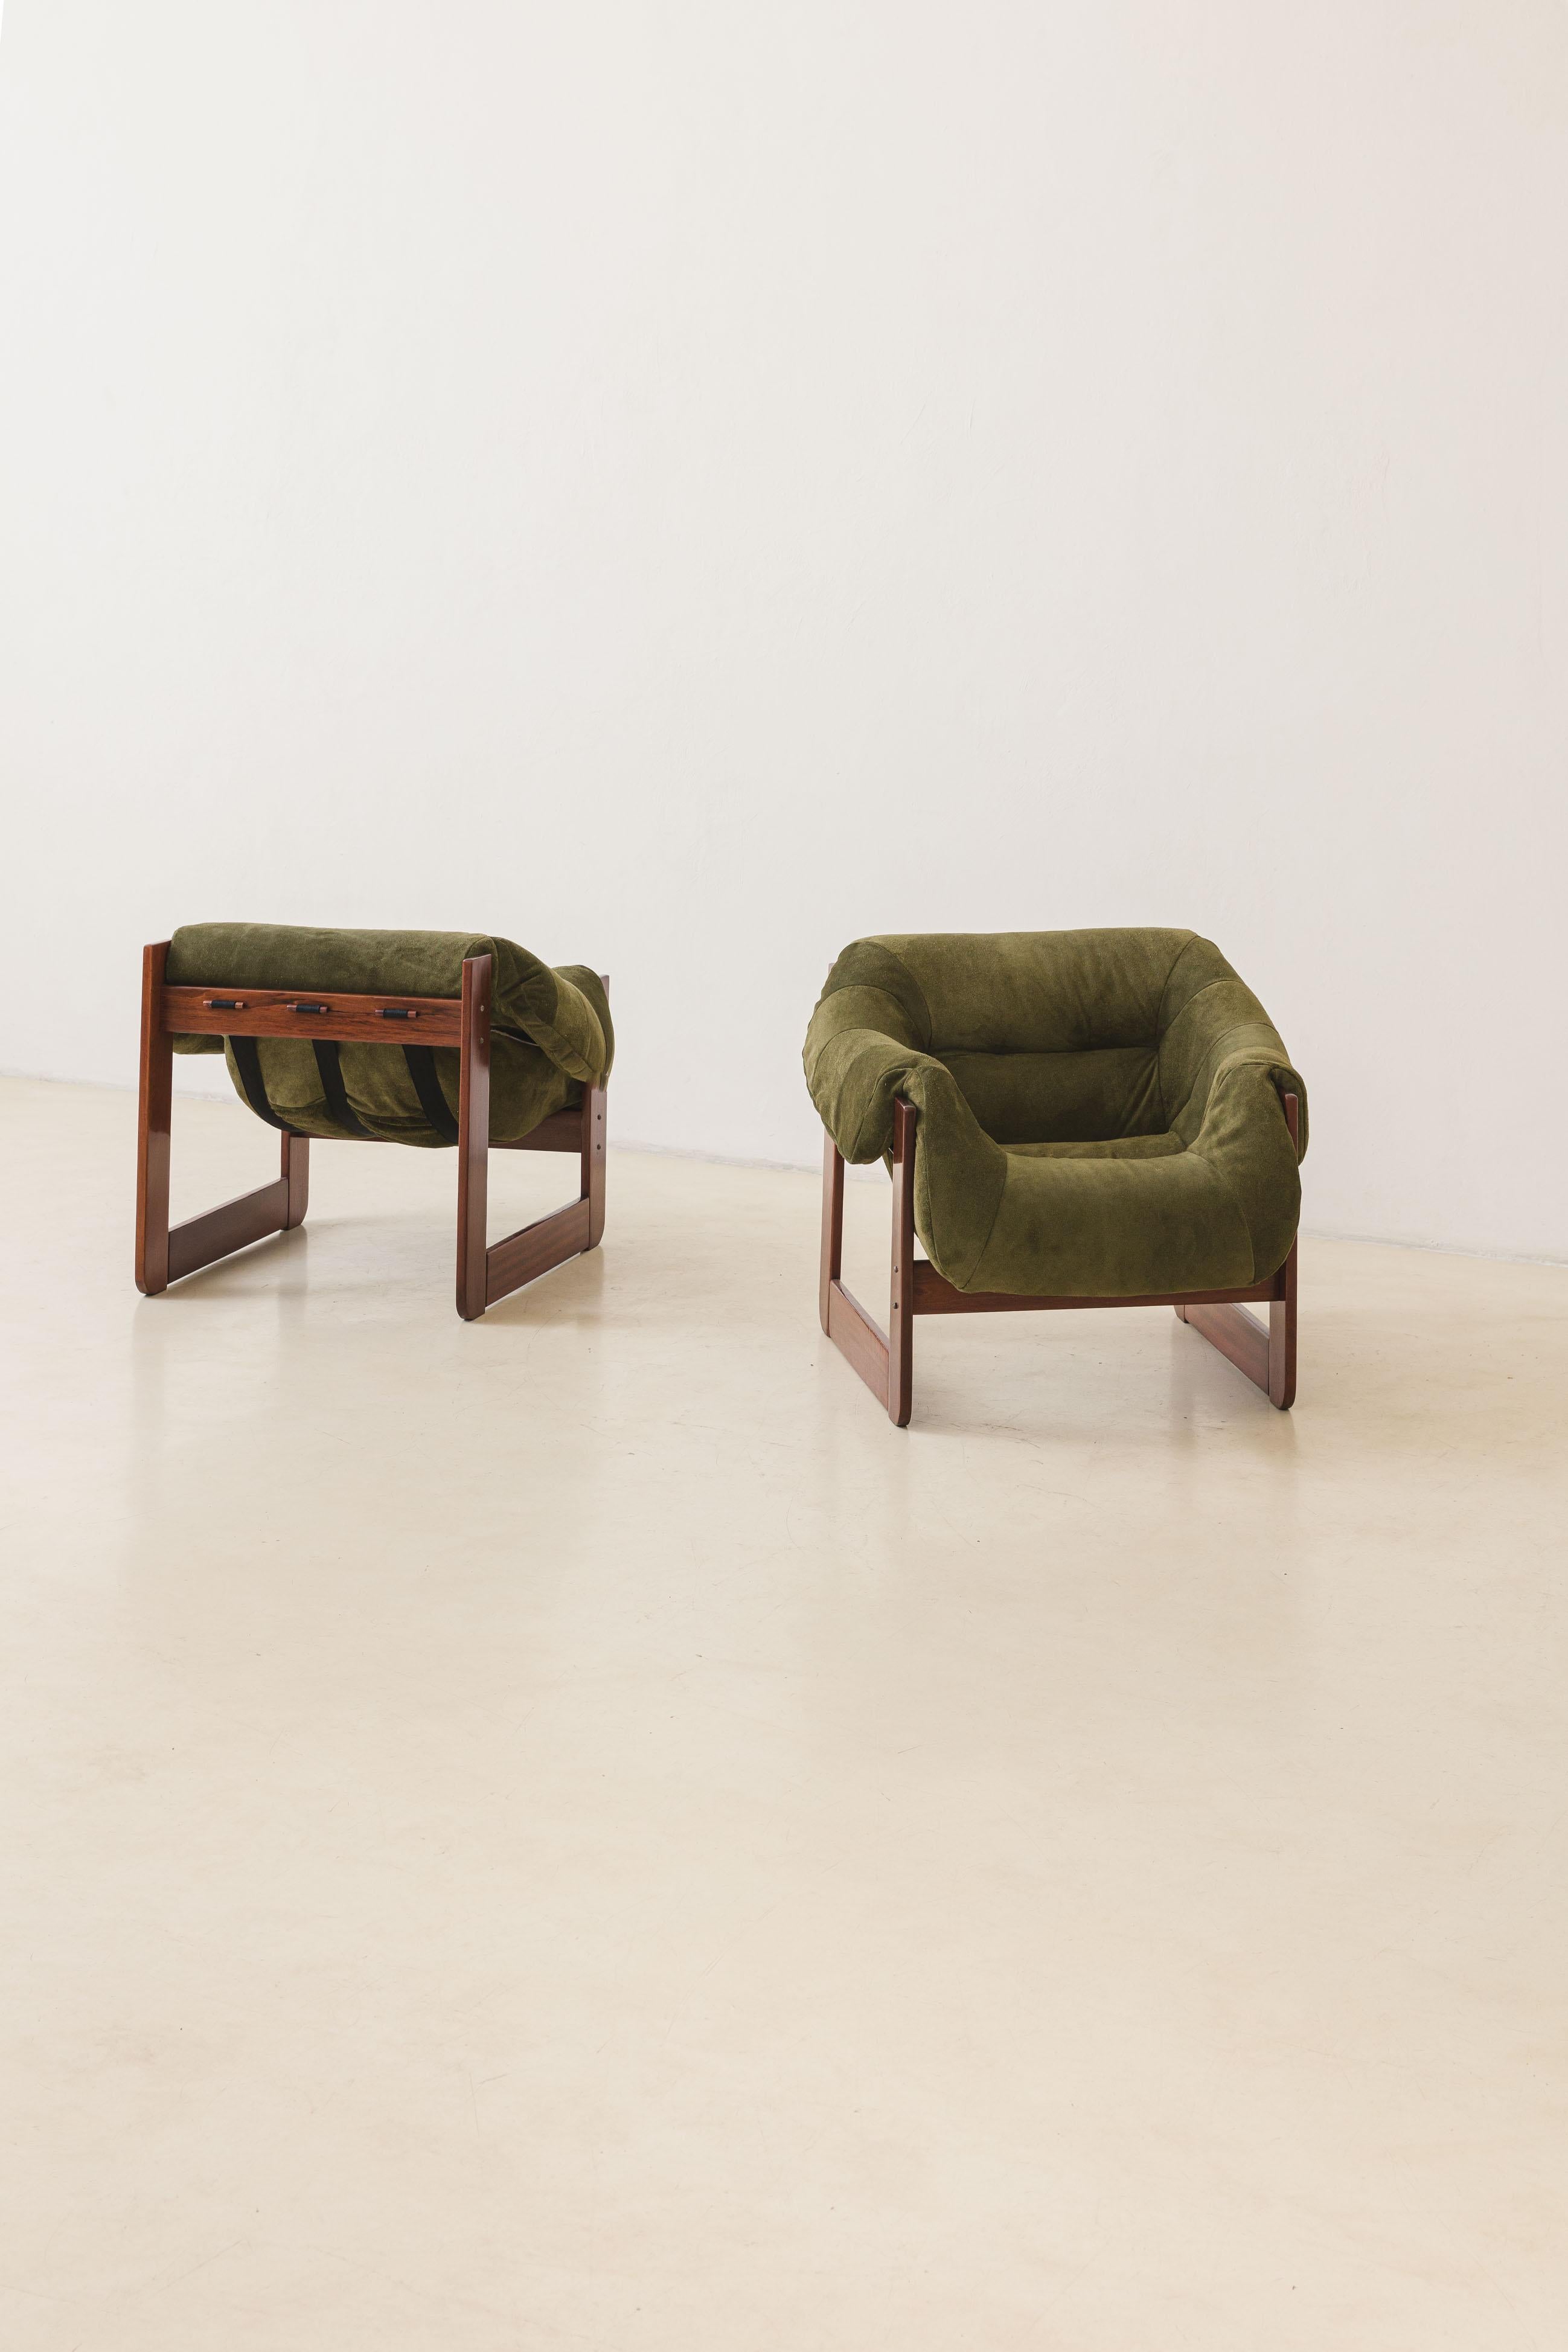 In his designs, Percival Lafer sought ergonomy and comfort. This pair of MP-97 lounge chairs by Percival Lafer comprises a solid Cedar wood structure with a single piece of a loose foam seat. Its unique design and construction make this an authentic